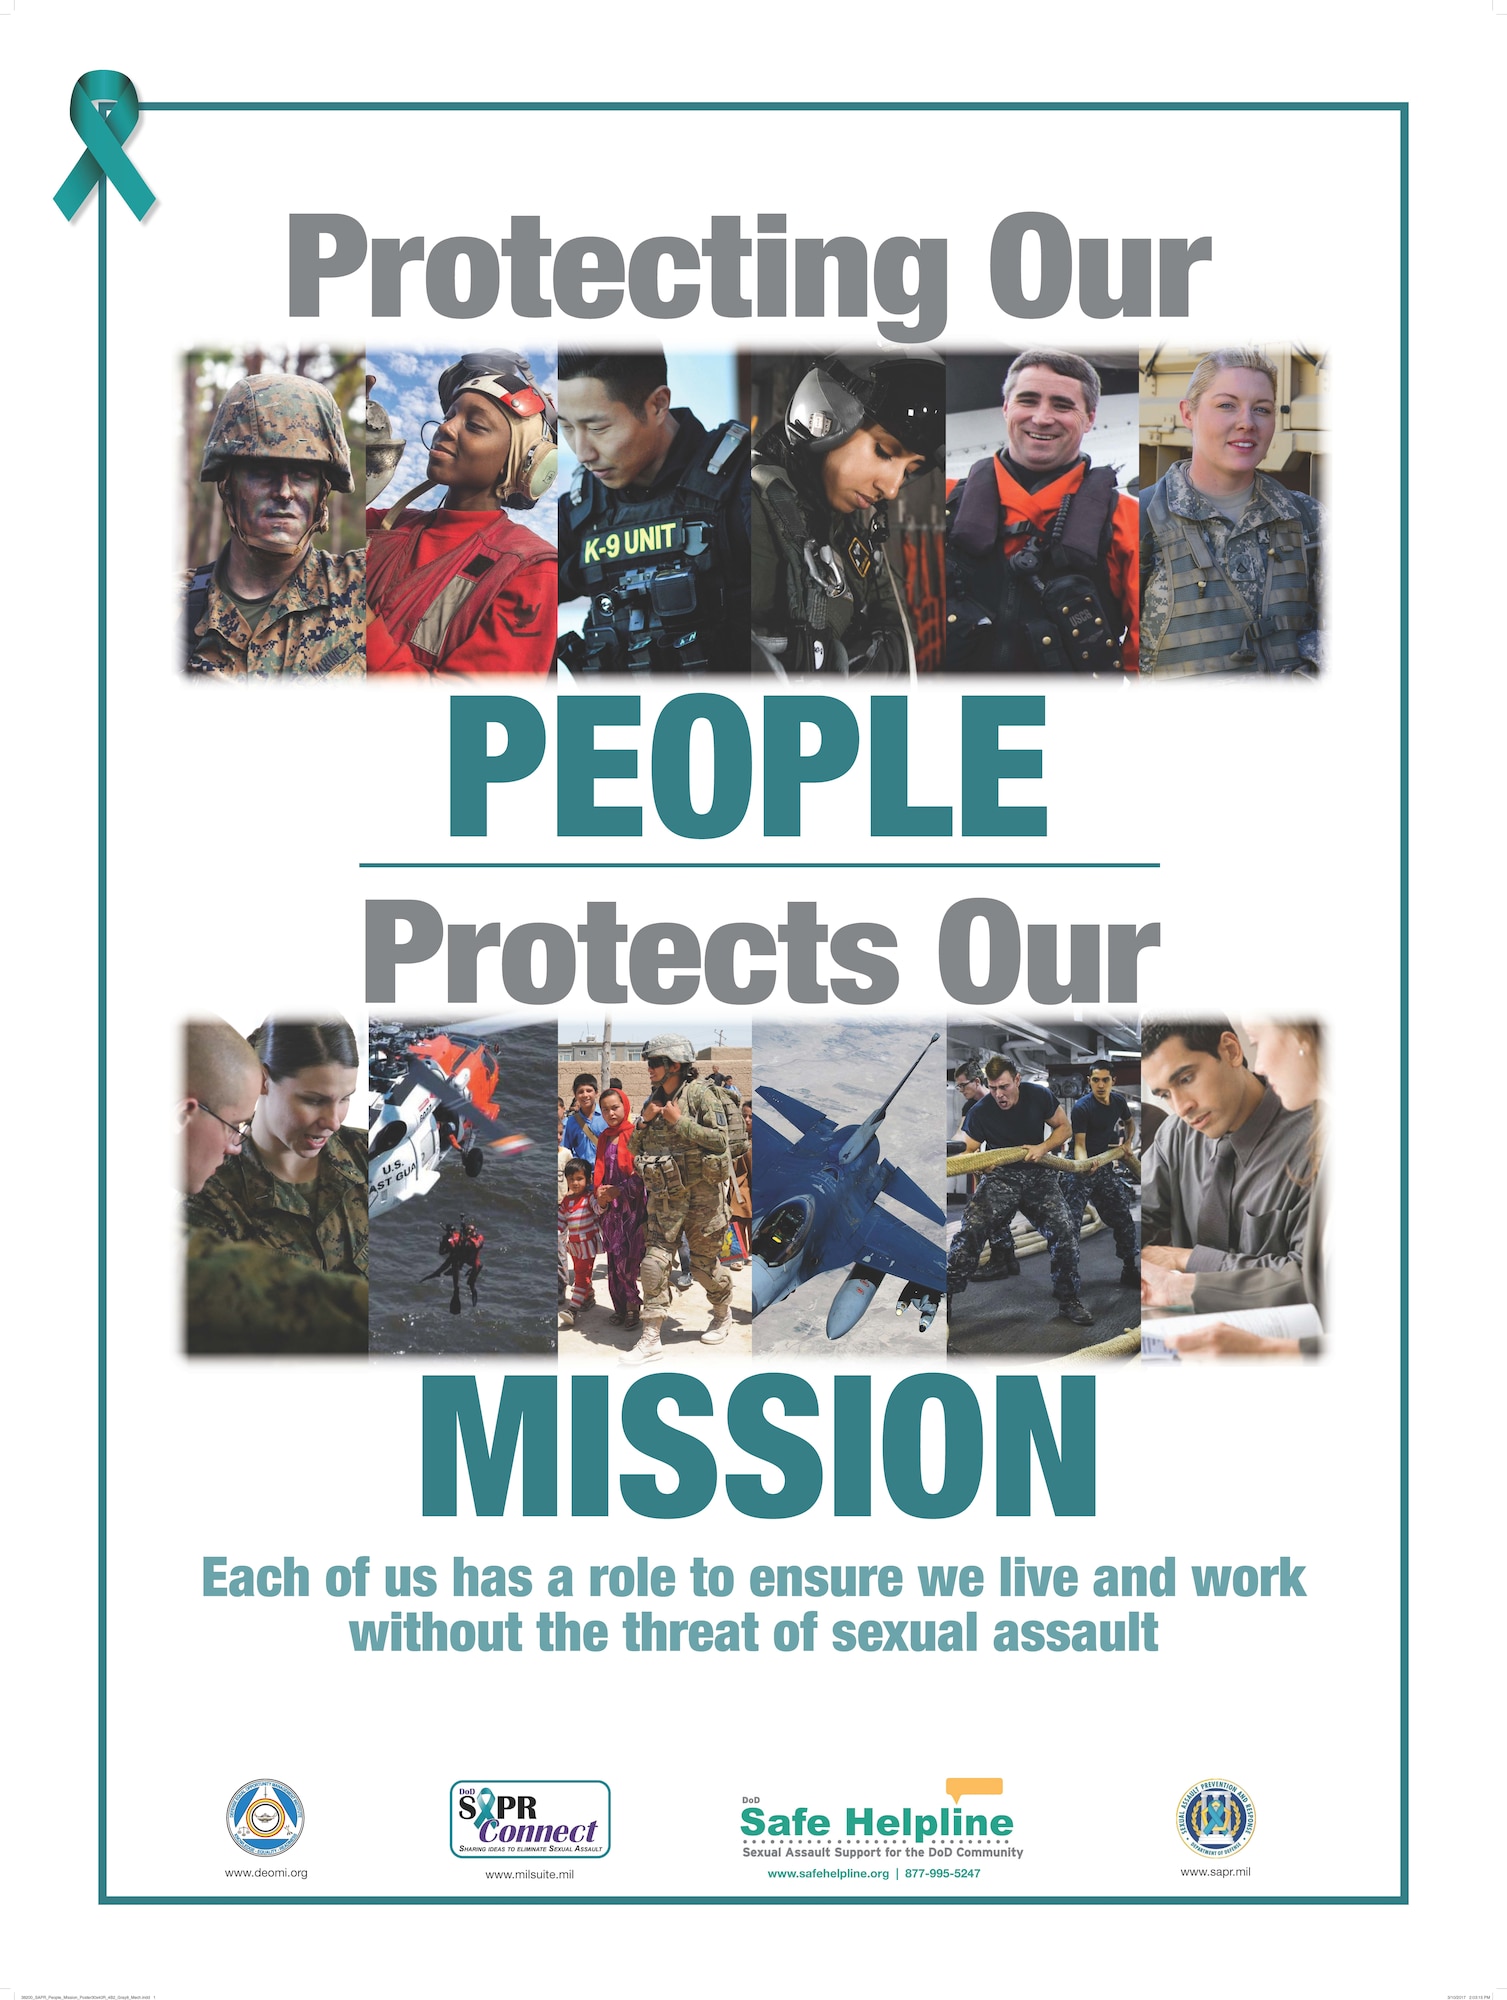 Protecting our people protects our mission graphic for sexual assault awareness and prevention month